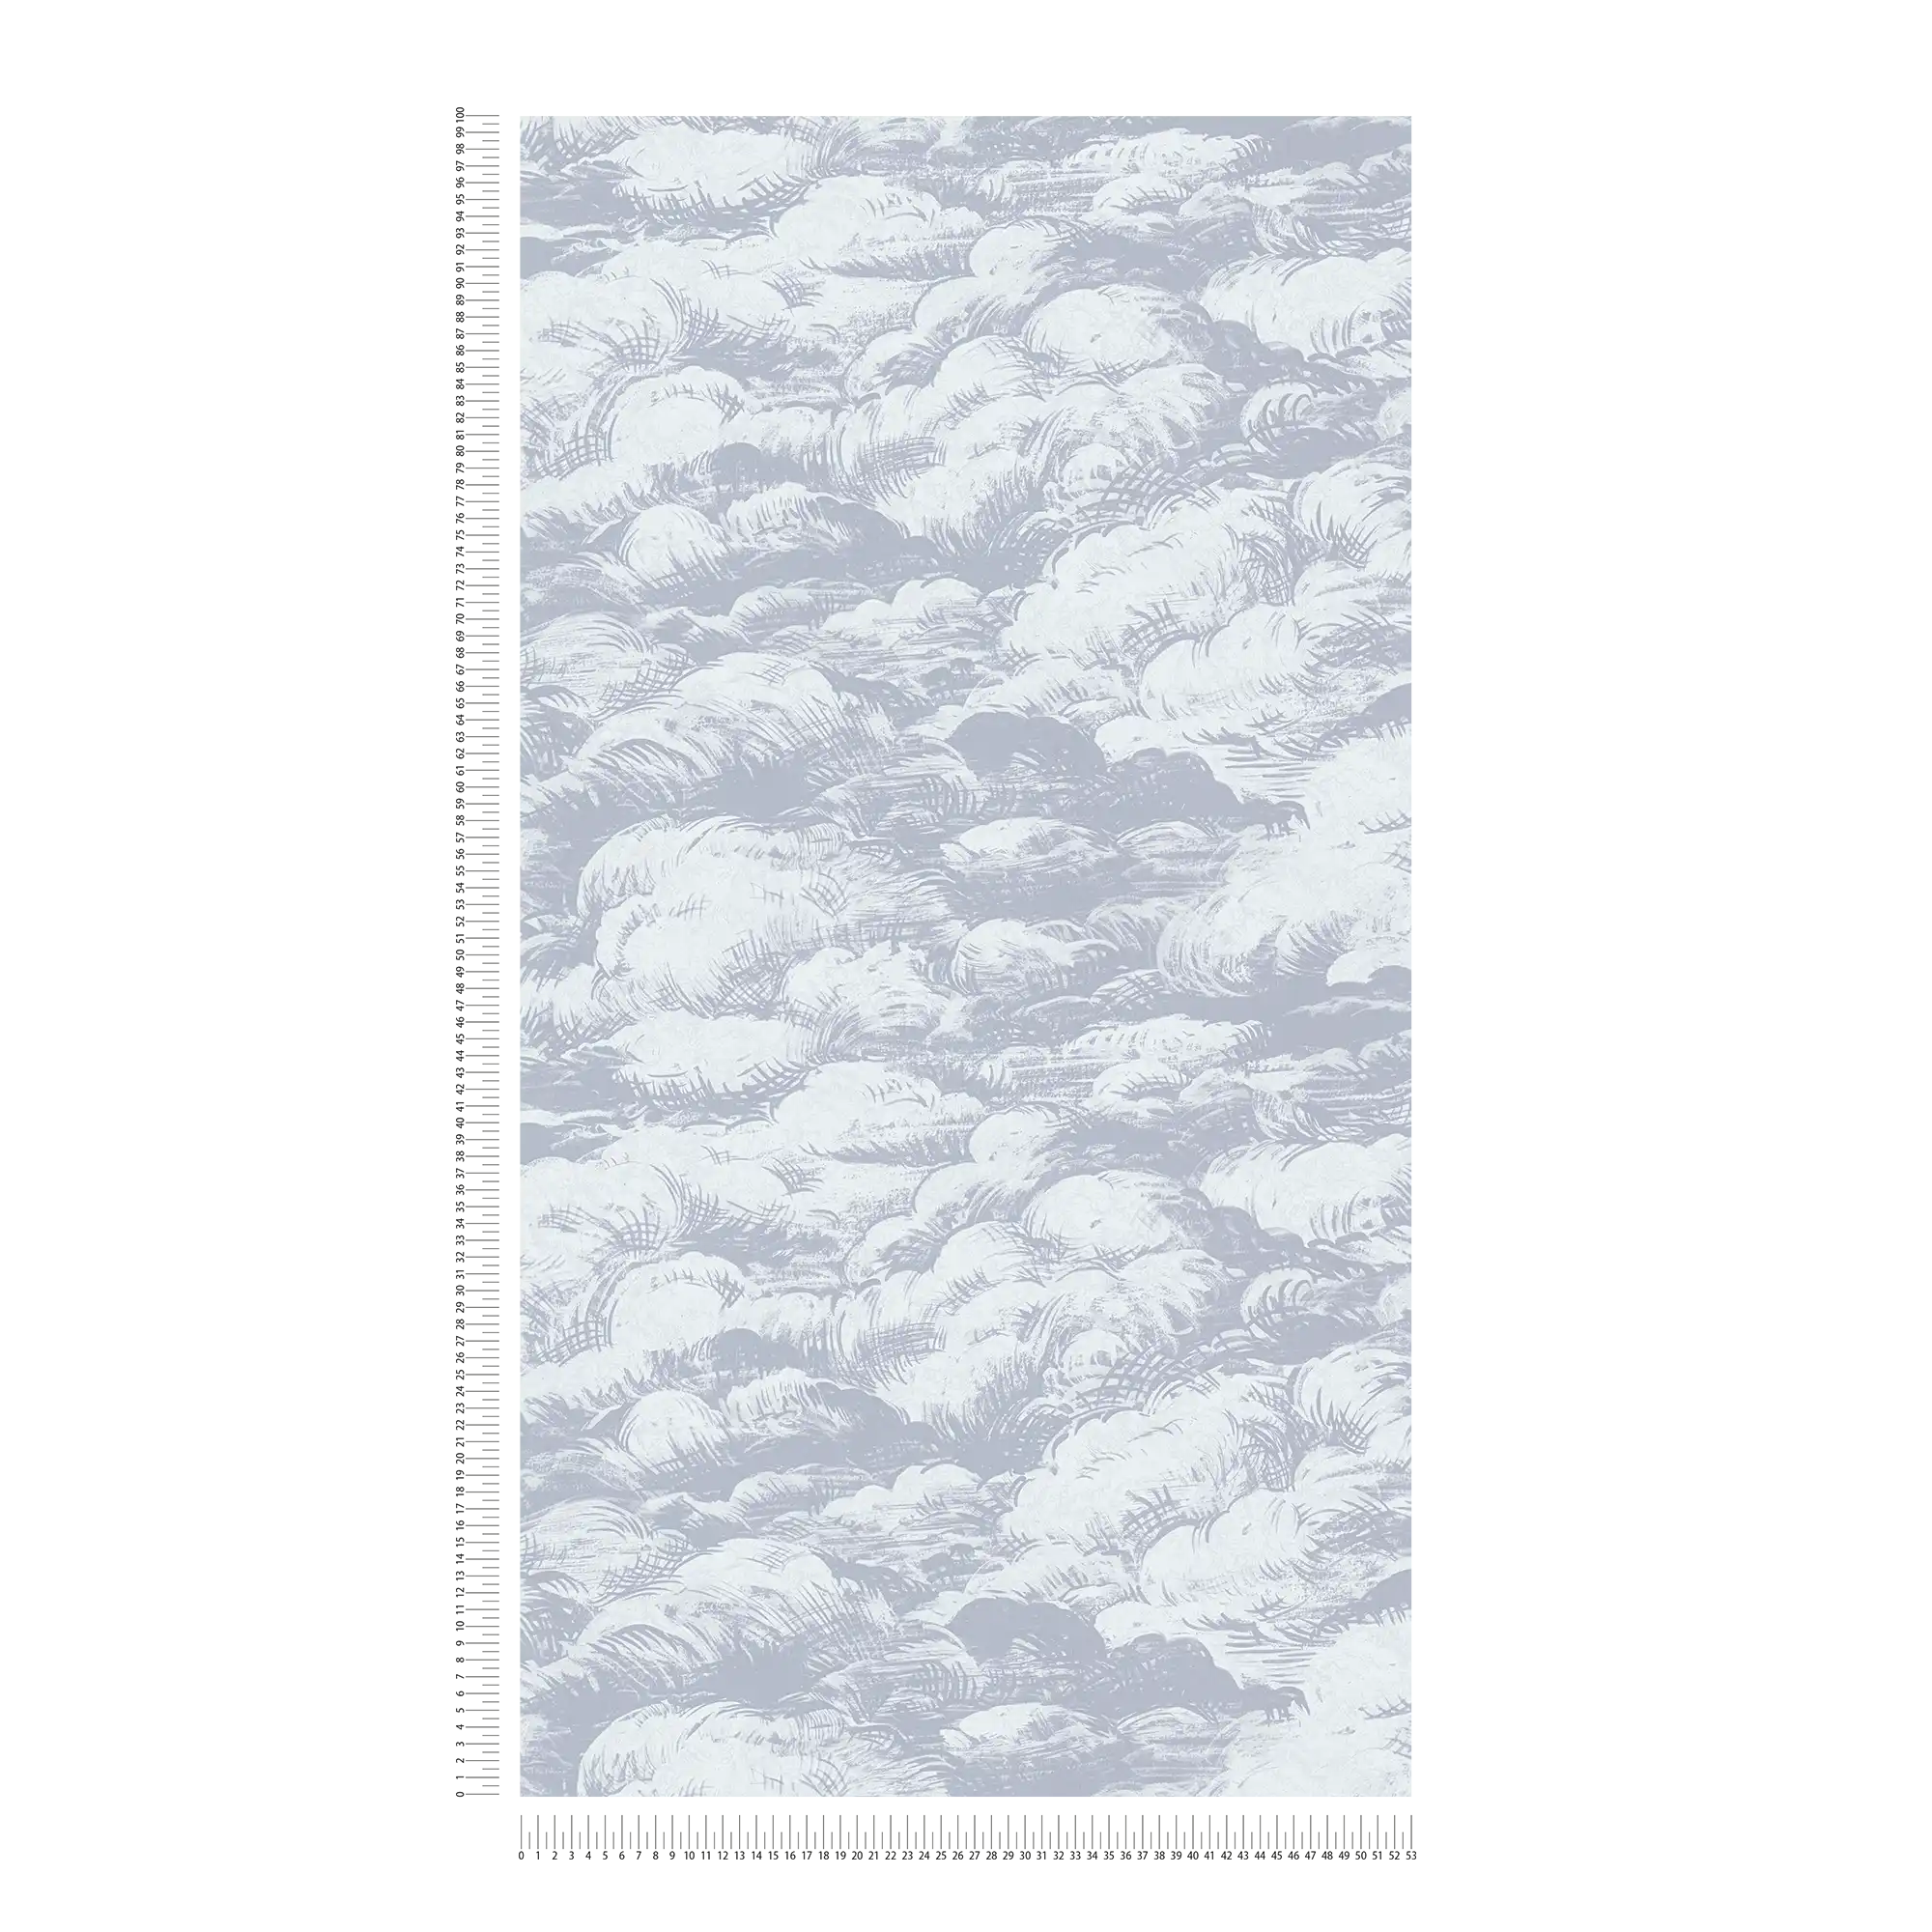             wallpaper grey with nature pattern in vintage style - grey, white
        